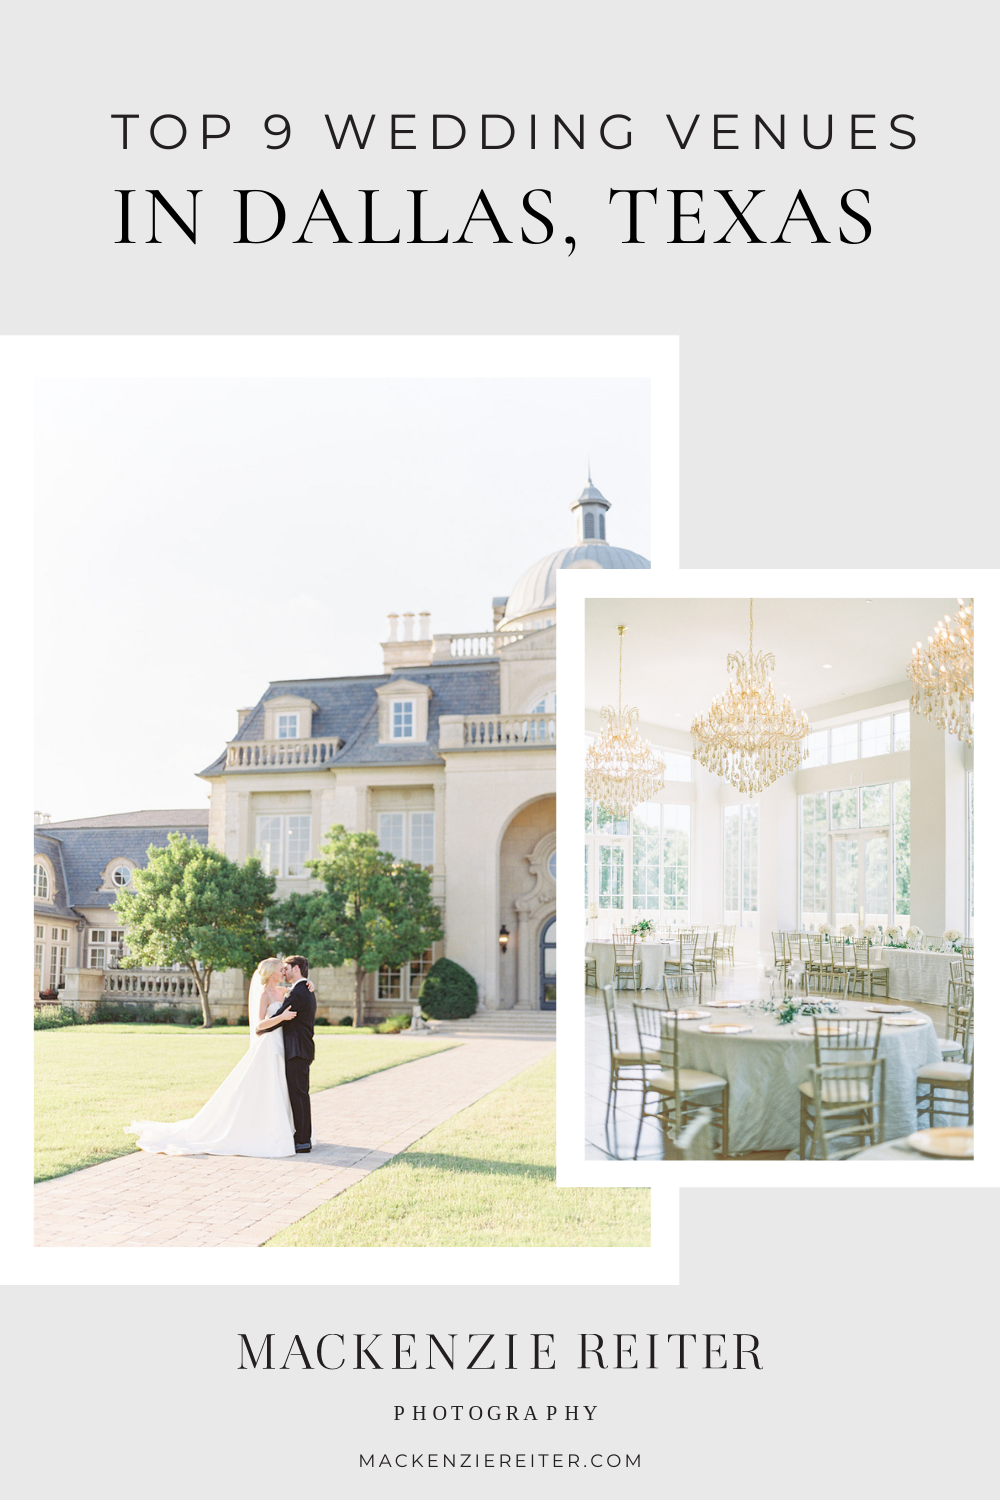 Collage of photos of bride and groom as well as the interior and exterior of The Olana taken by Mackenzie Reiter Photography; image overlaid with text that reads The Top 9 Wedding Venues in Dallas, Texas